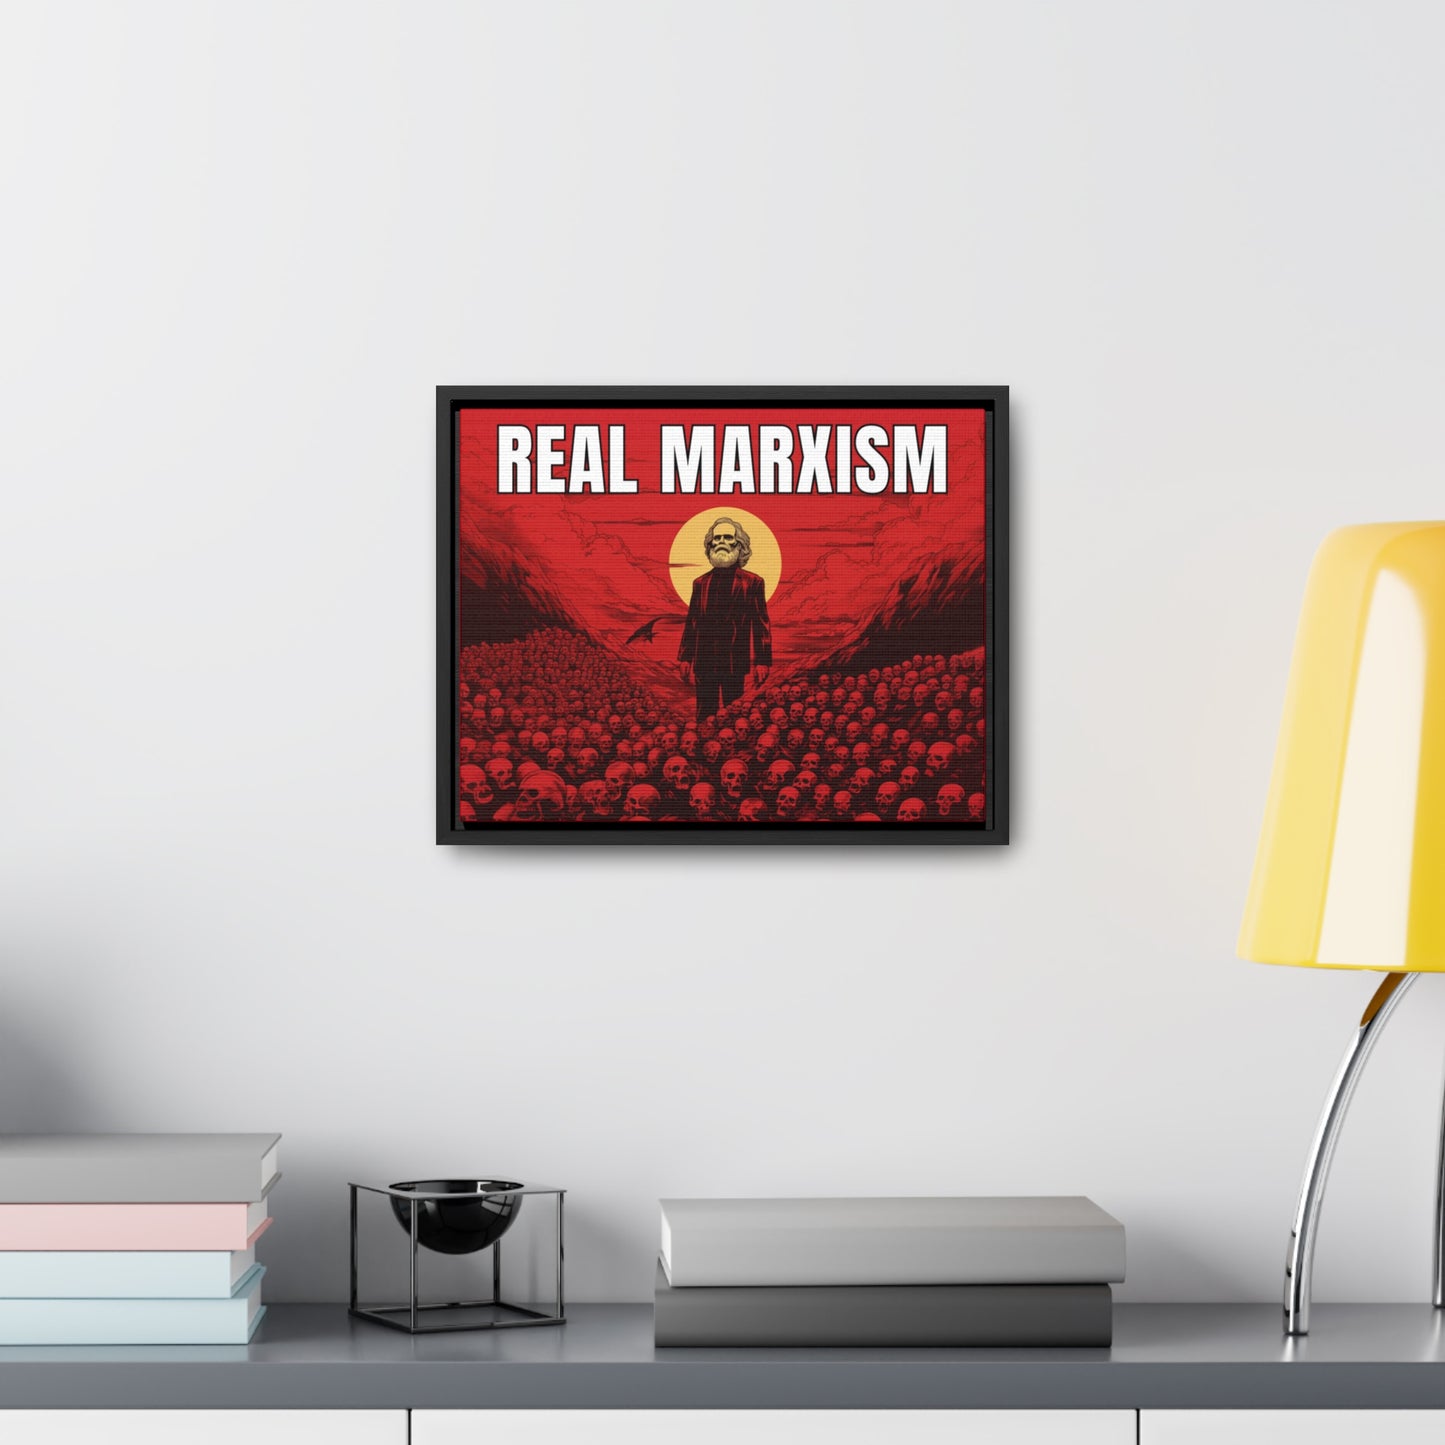 Real Marxism Gallery Canvas Wraps, Horizontal Frame